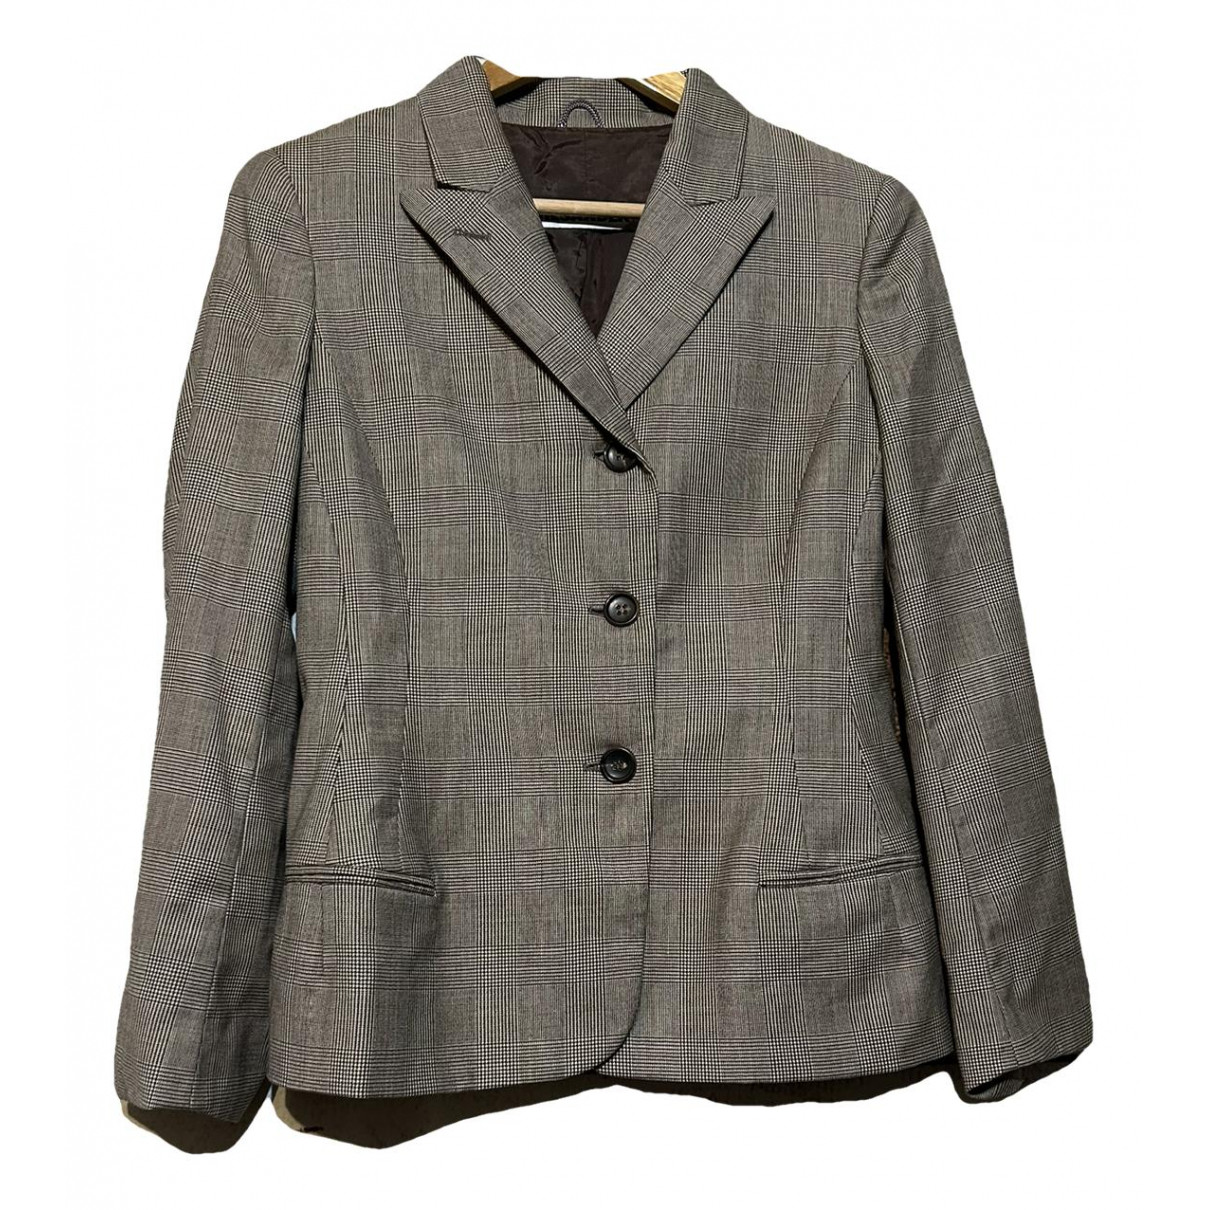 clothing Jil Sander jackets for Female Wool 36 IT. Used condition